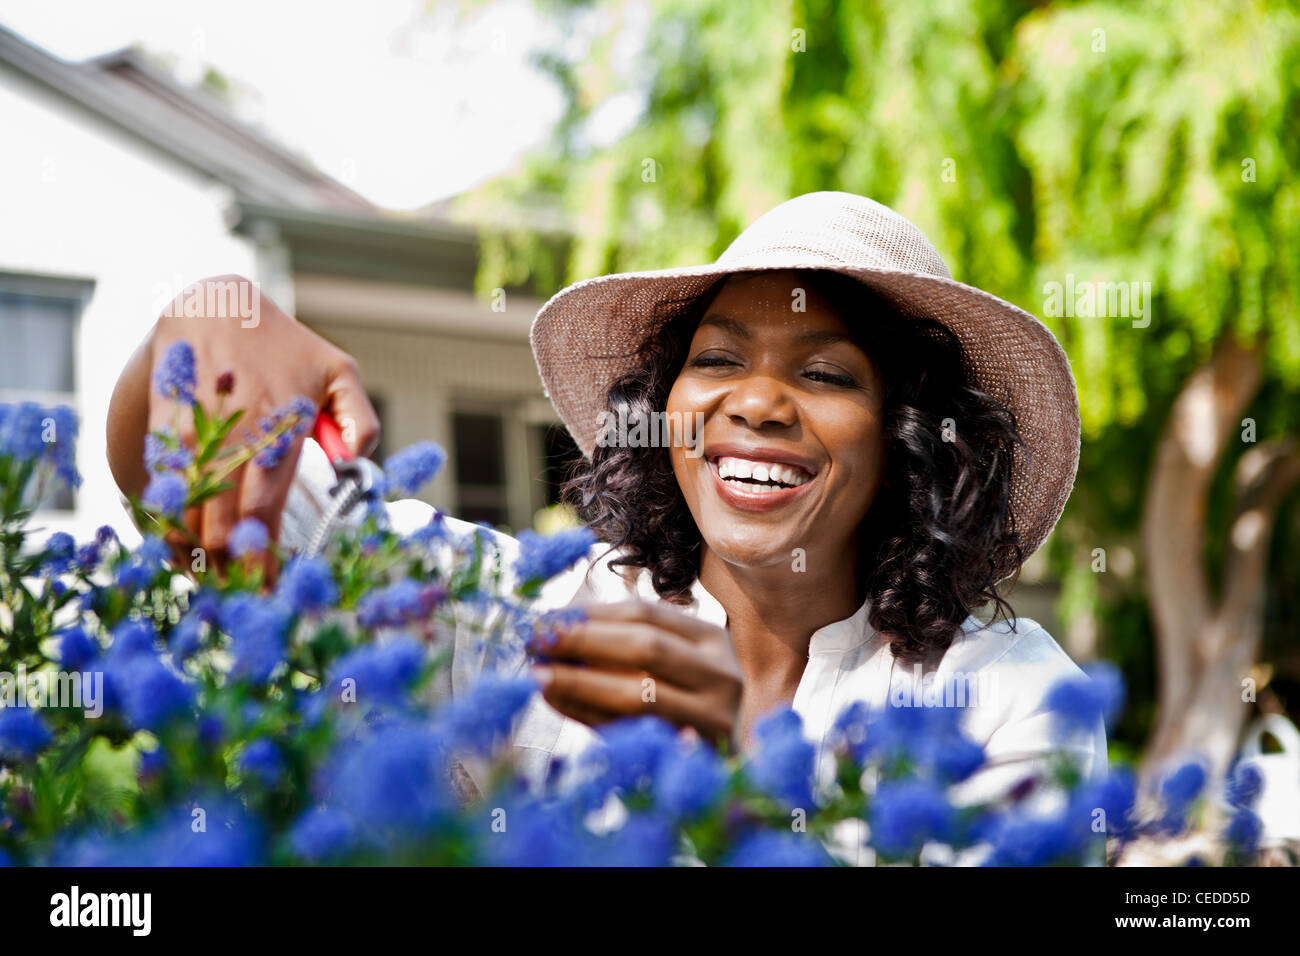 Smiling woman pruning flowers in garden Stock Photo